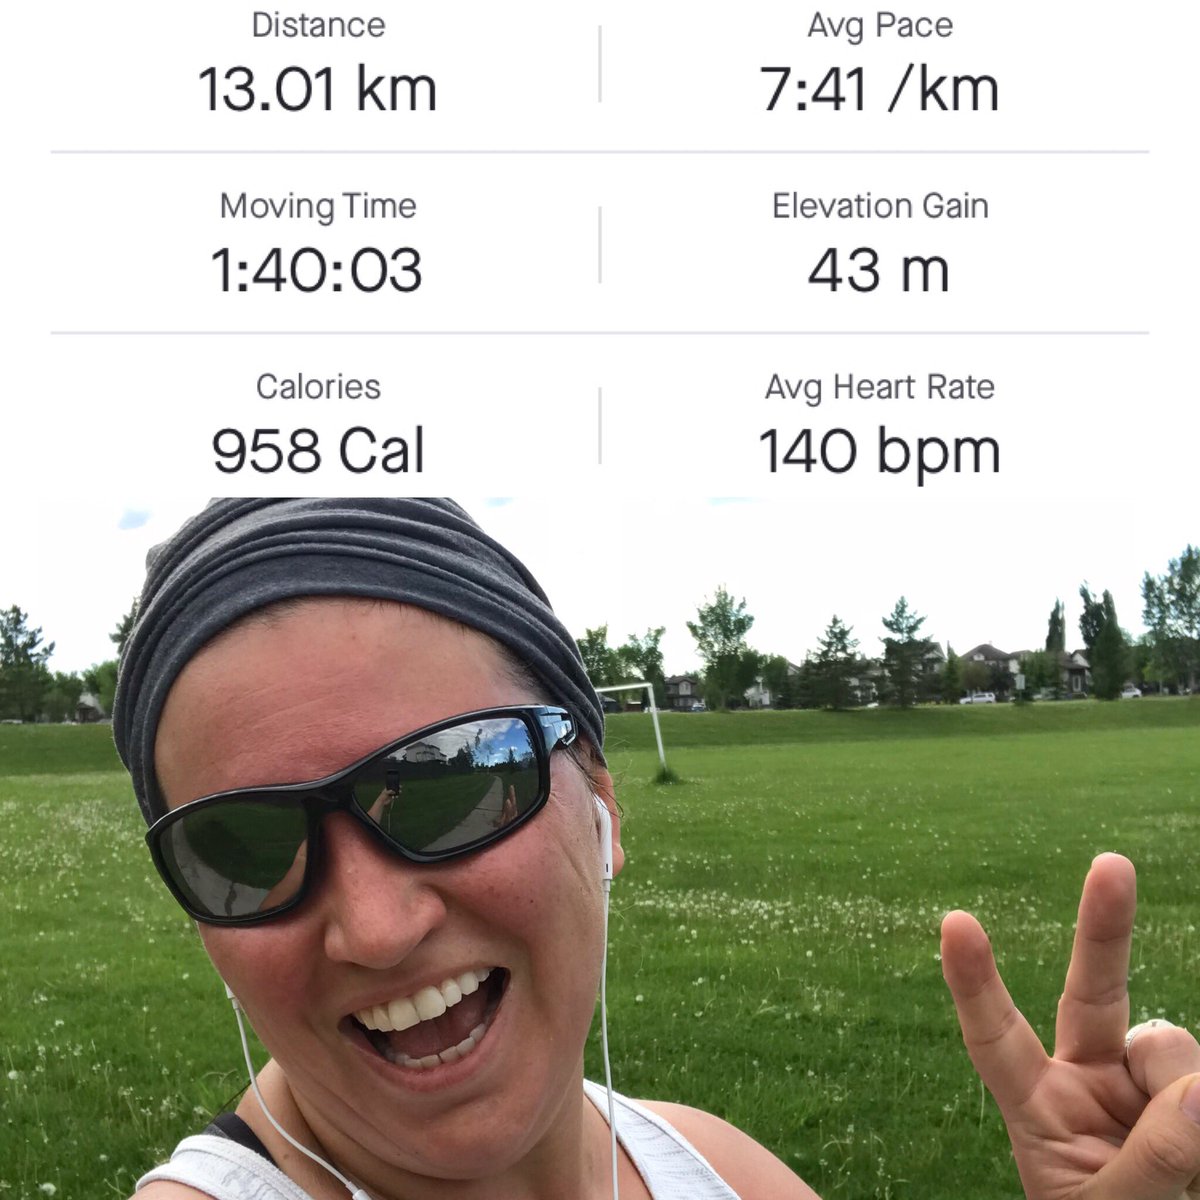 I used every excuse in the book yesterday to skip my long run....today I was literally out of excuses. #yegvirtualrunclub #yegrun  #lowandslow #likeagoodchili